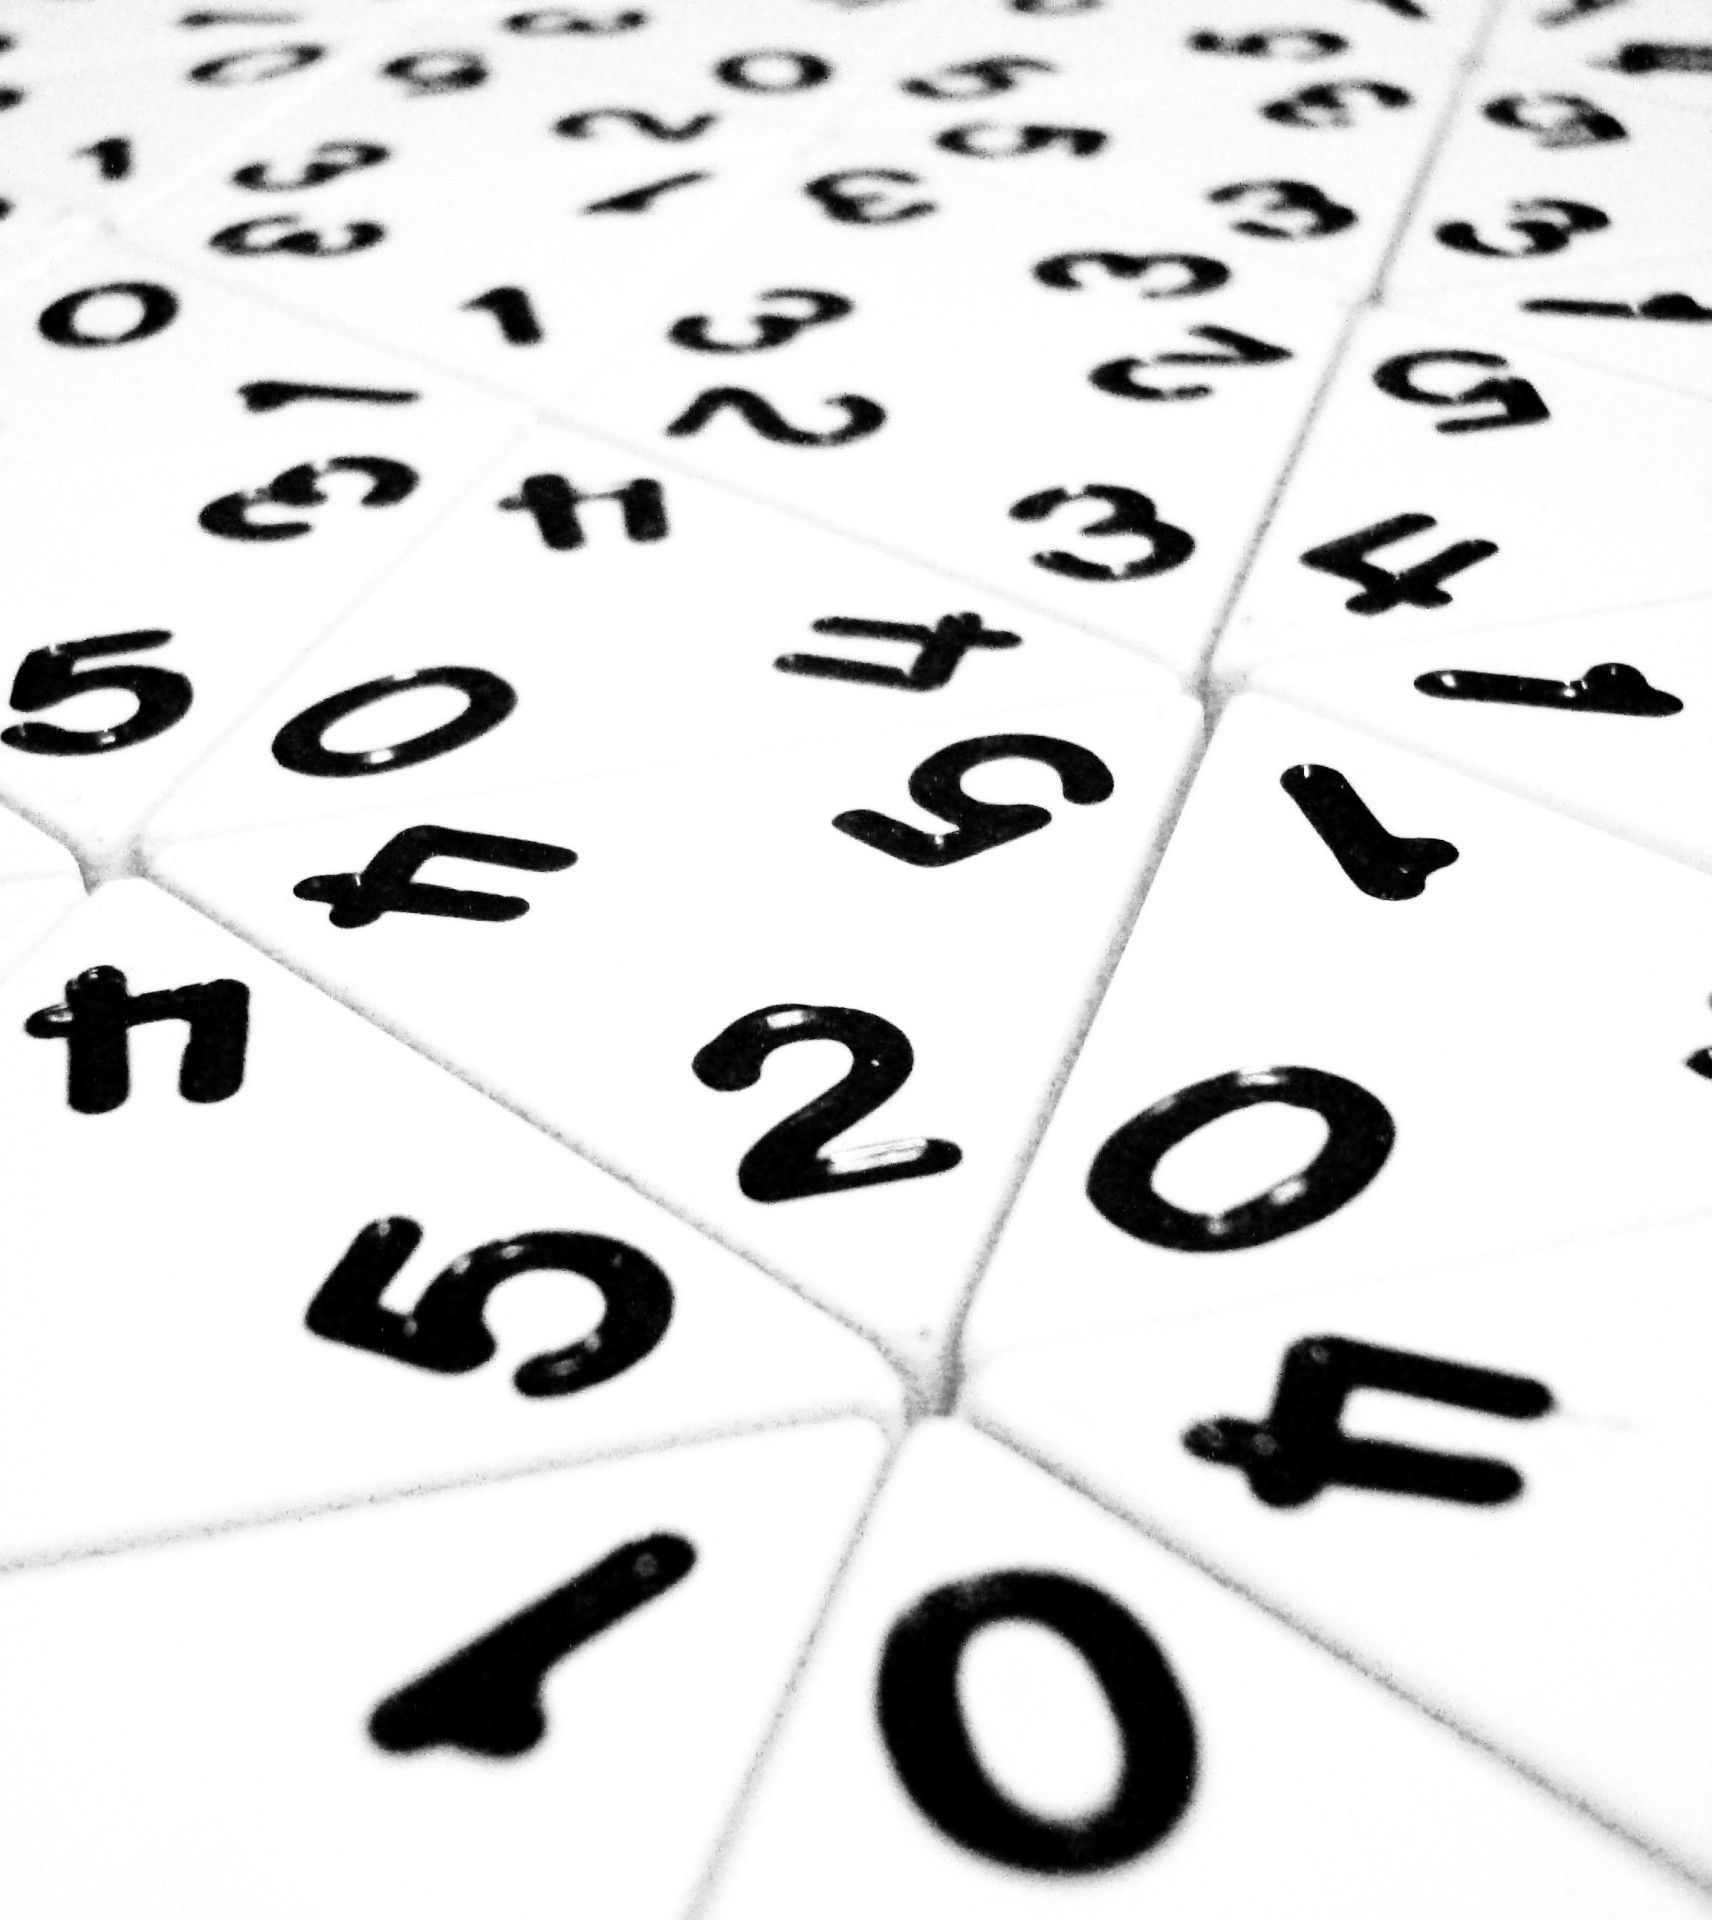 random-numbers-free-stock-photo-public-domain-pictures